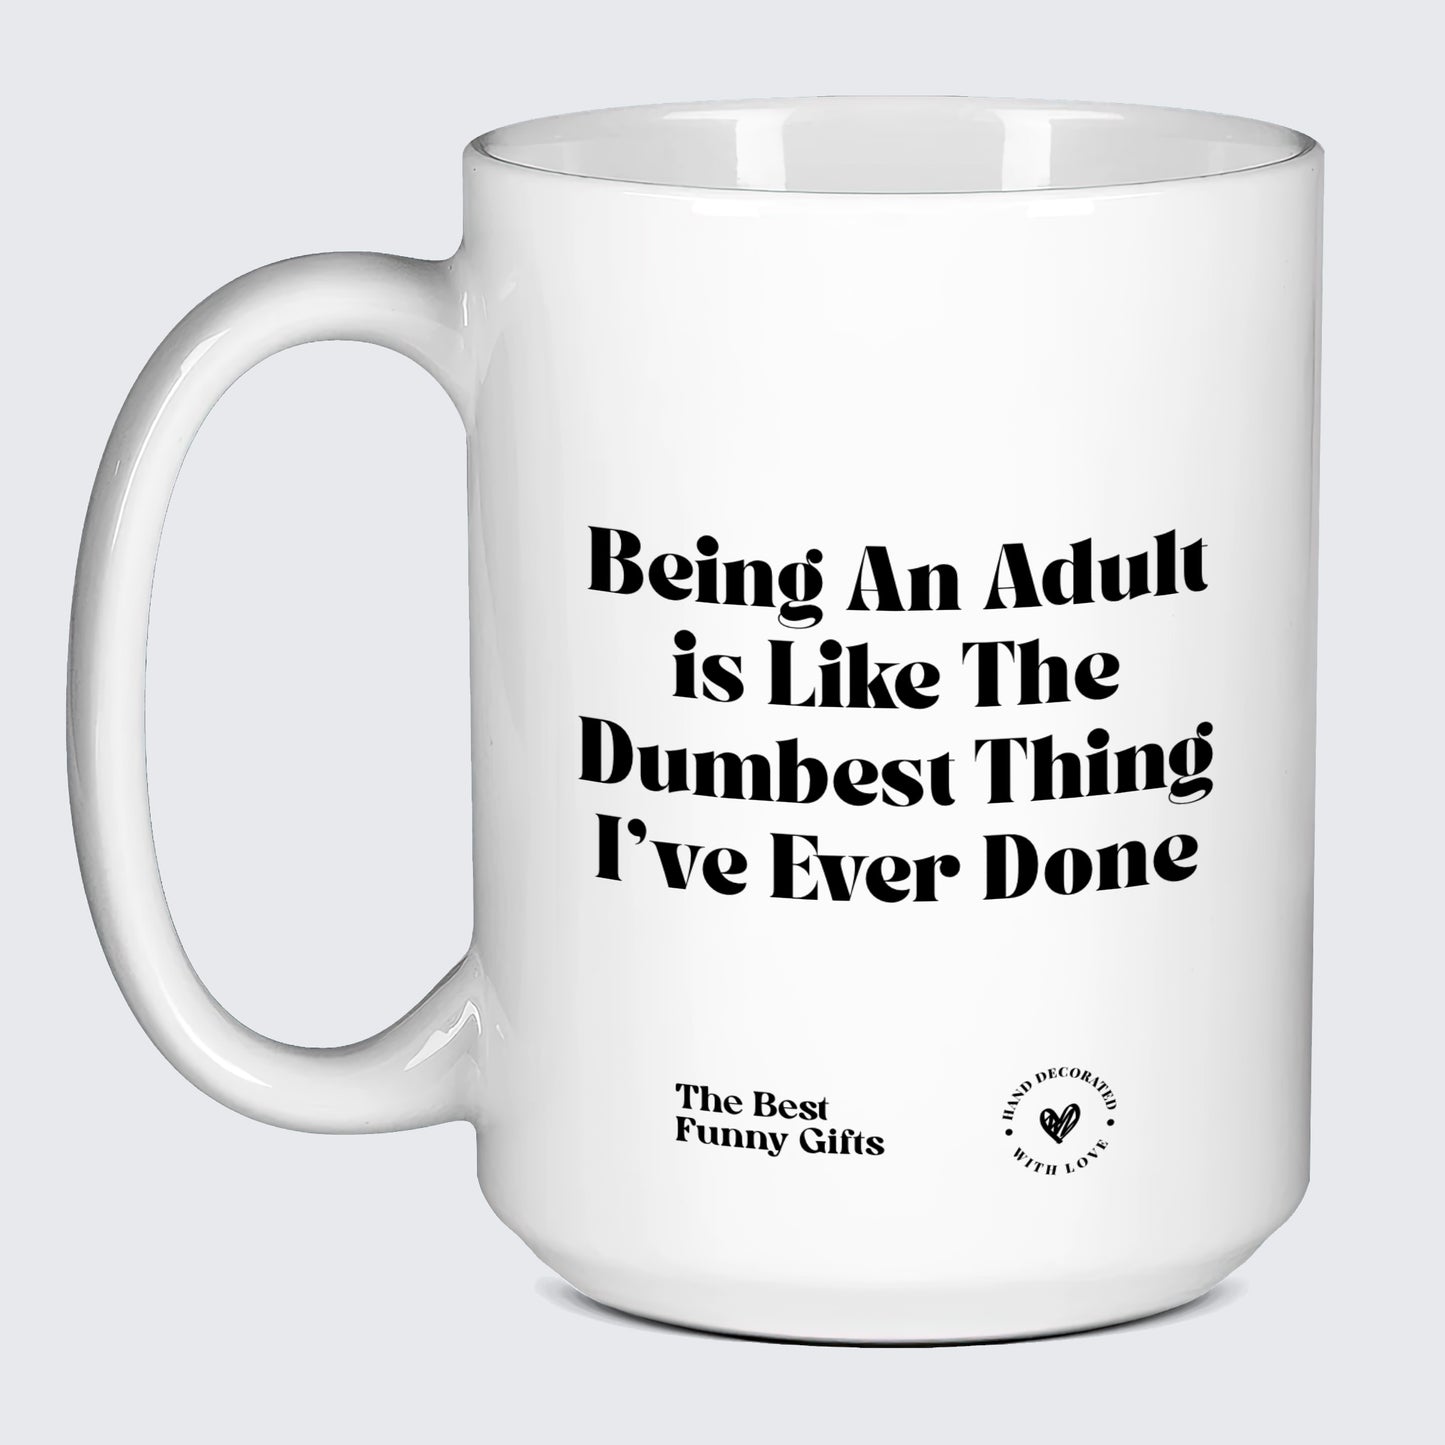 Cute Mugs Being an Adult is Like the Dumbest Thing I've Ever Done - The Best Funny Gifts